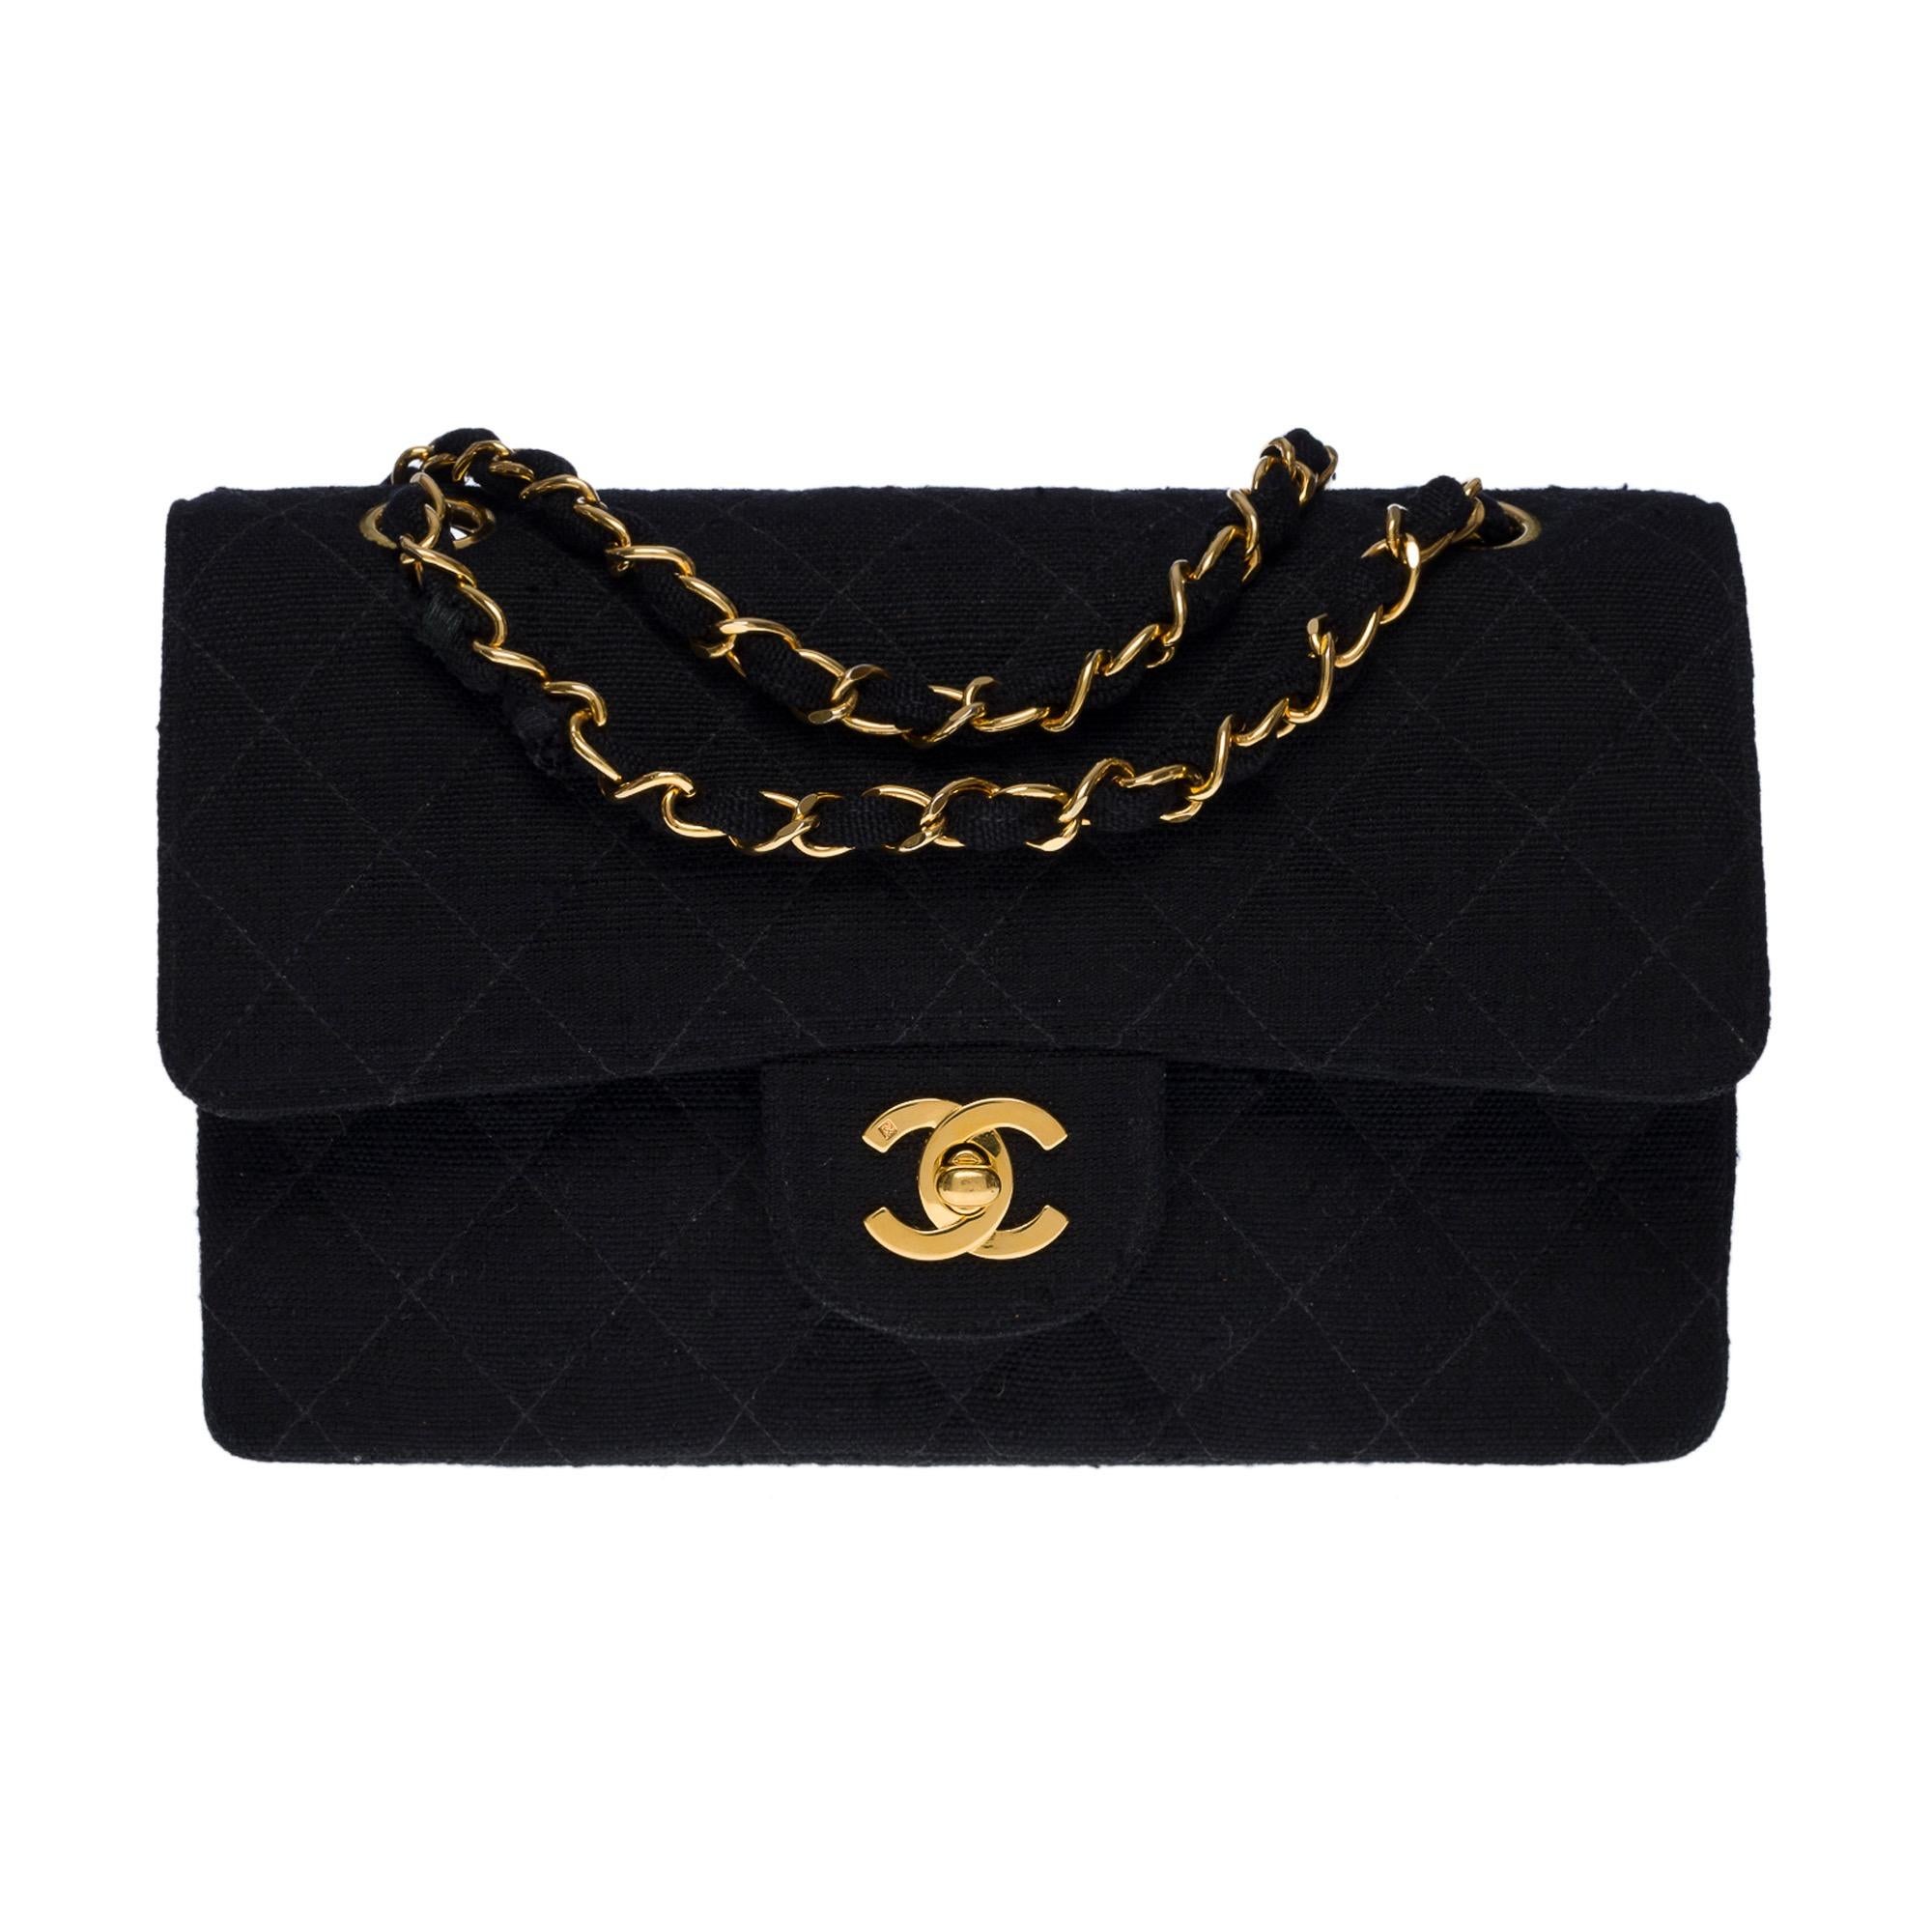 The coveted Chanel Timeless 23 cm bag with double flap in black linen, gold-plated metal hardware, a gold-plated metal chain handle interlaced with black linen for a shoulder and shoulder strap
Backpack pocket
Flap closure, gold CC signature